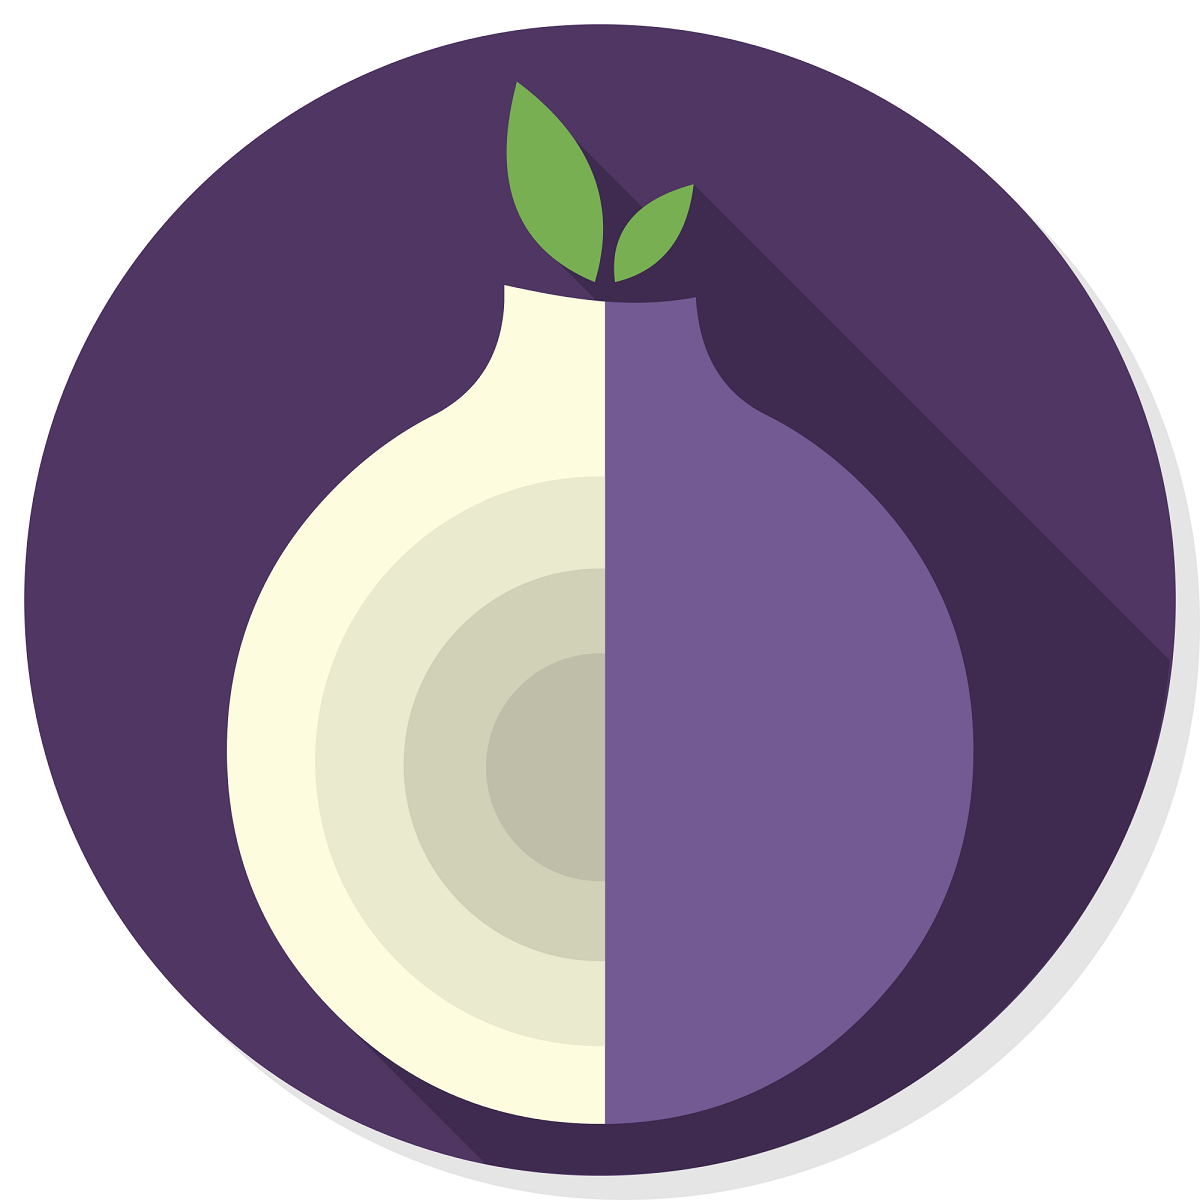 tor network browser